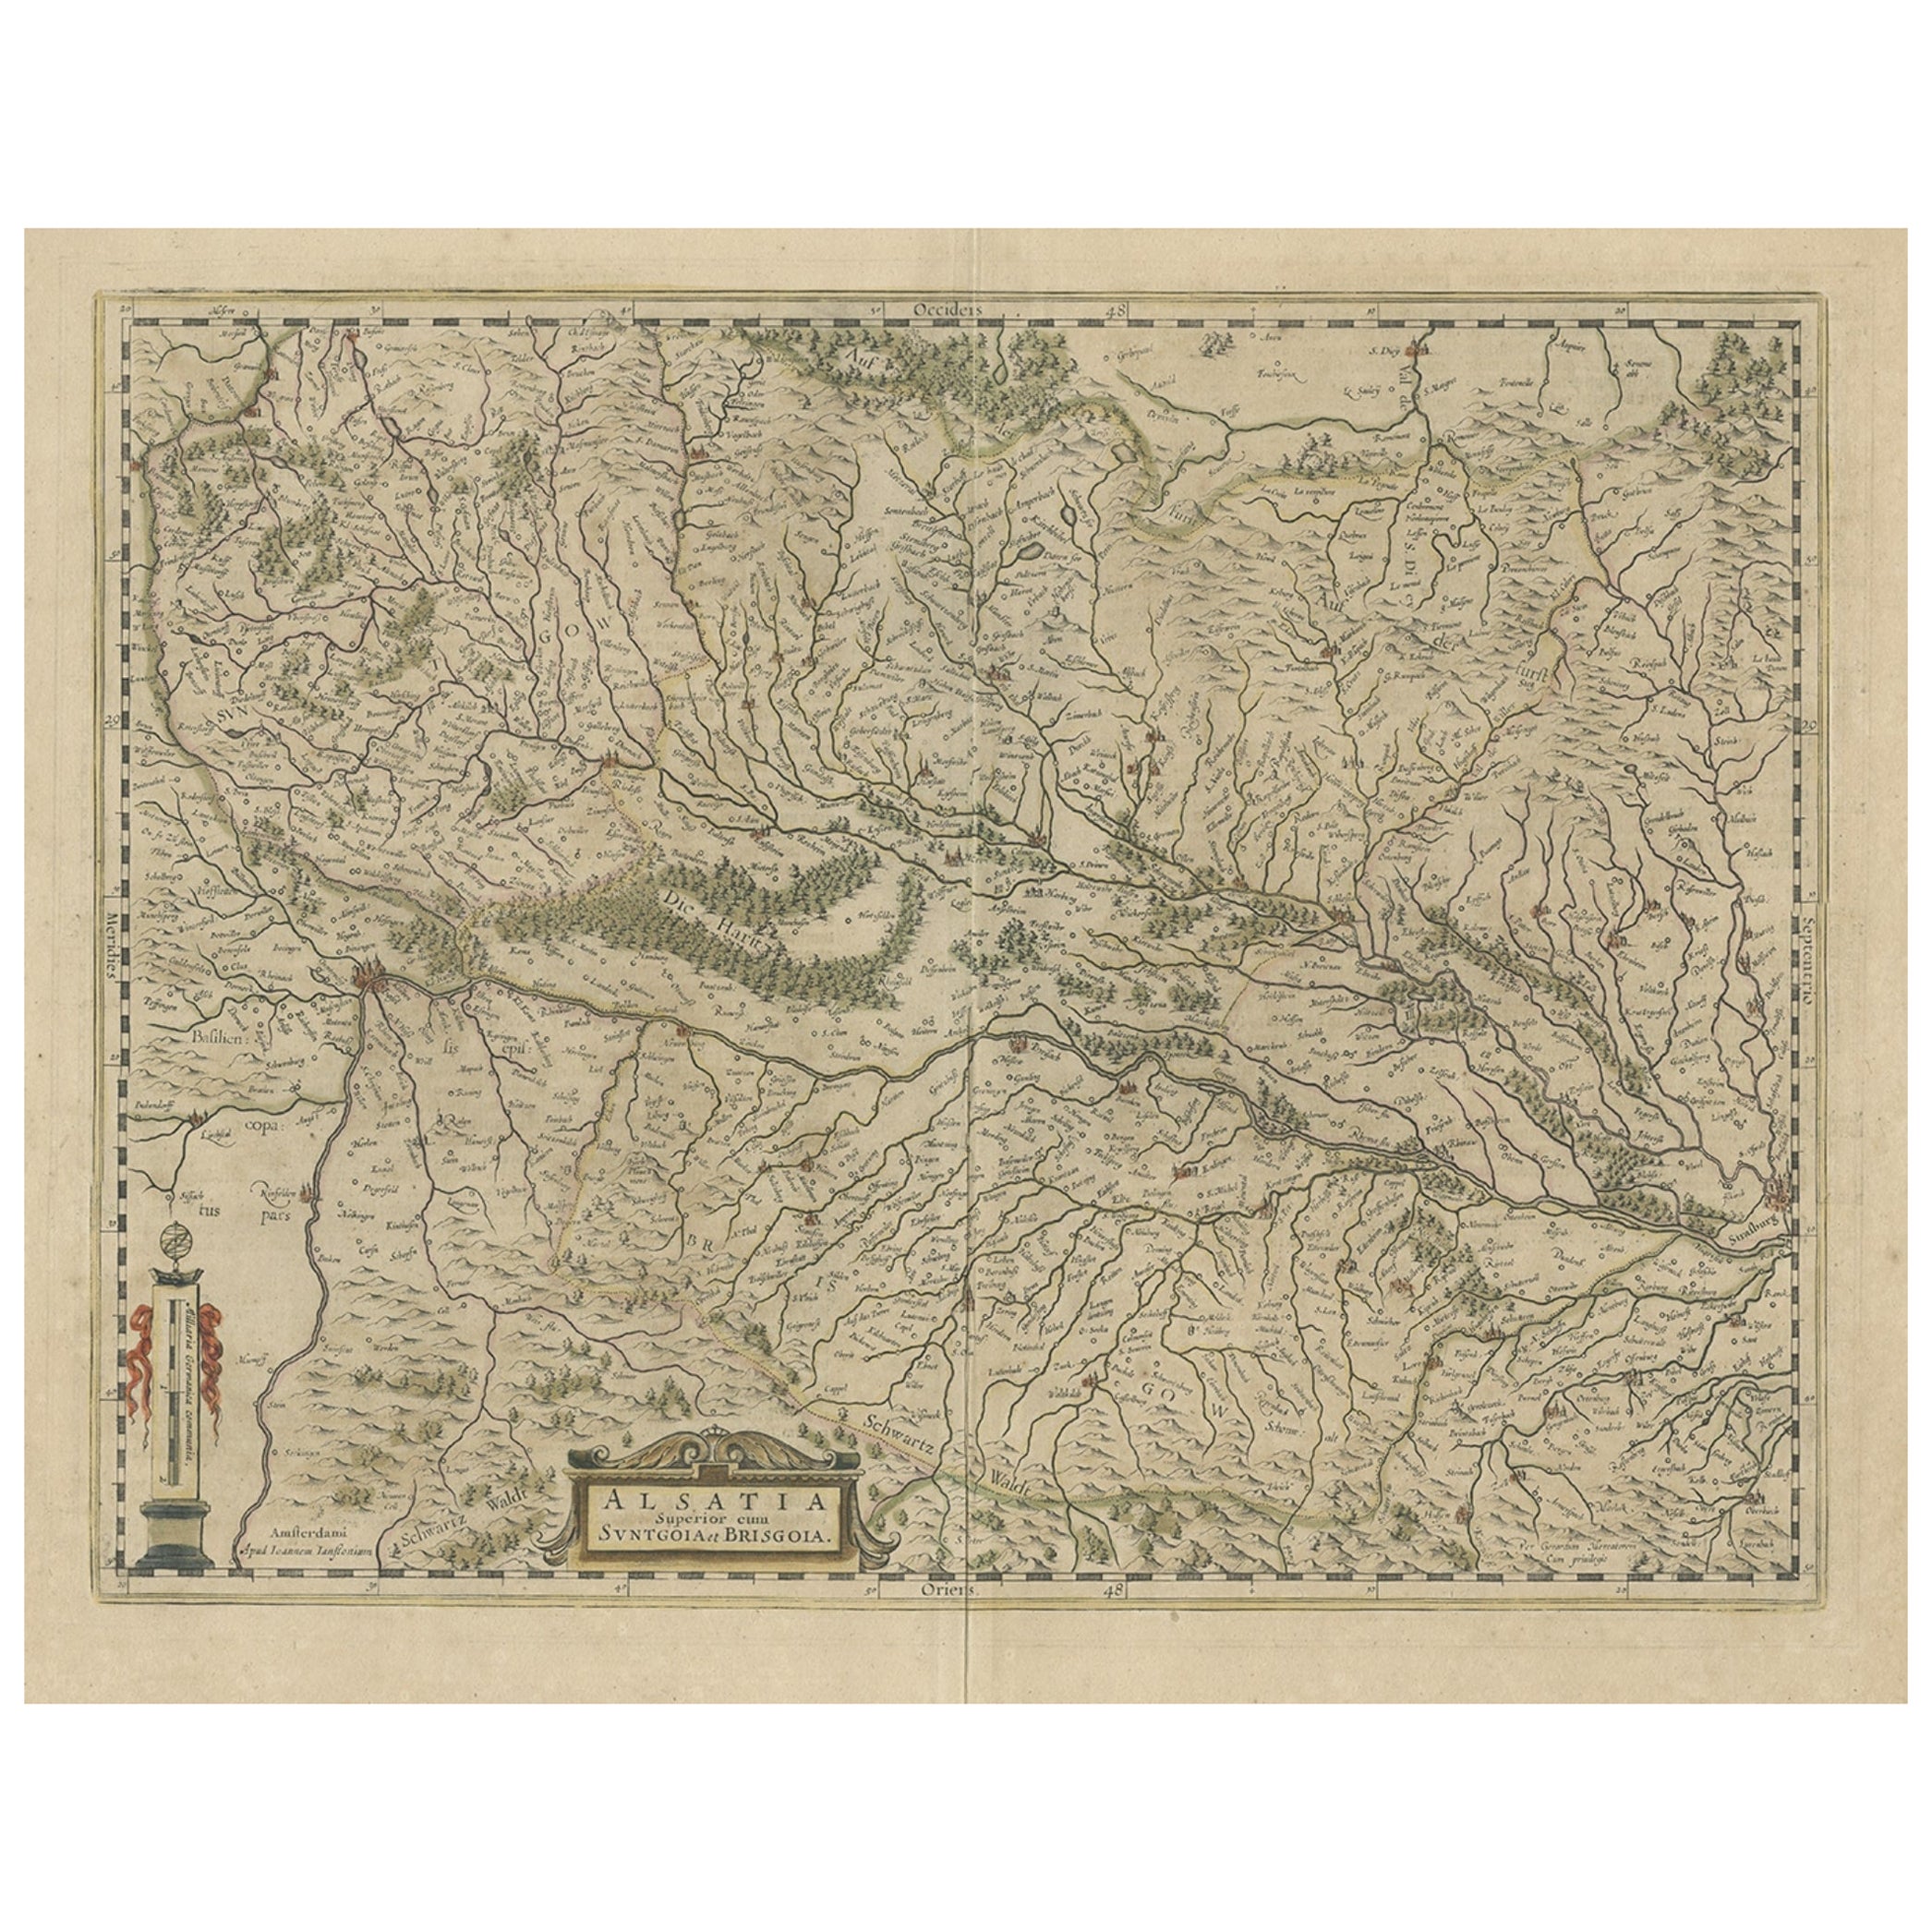 Old Map of the Alsace 'Elzas' Region with Lotharingen 'Lorraine', France, c1650 For Sale